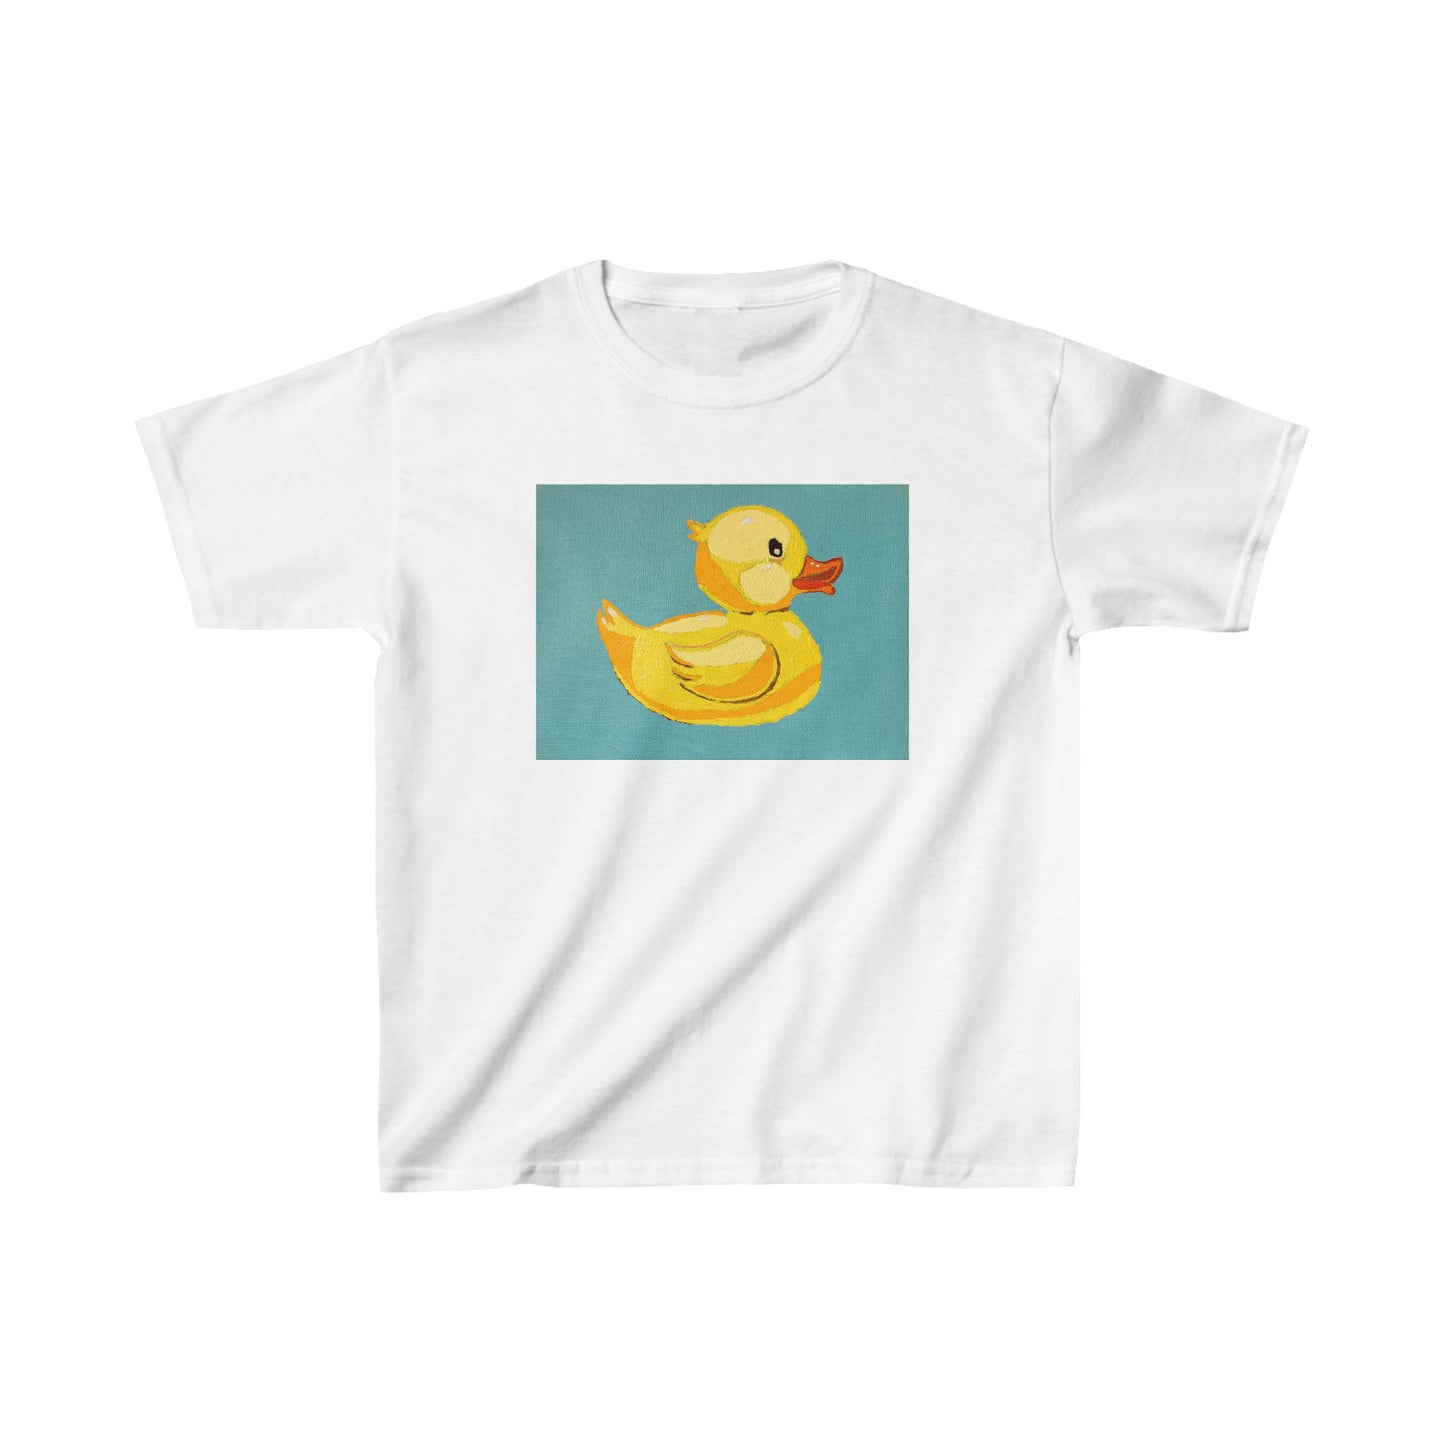 Pop Duck Kids Premium Lifestyle Tee ¬ Gifts with Art Inspiration ¬ Pair with Unisex Adult Tees for Family Fun